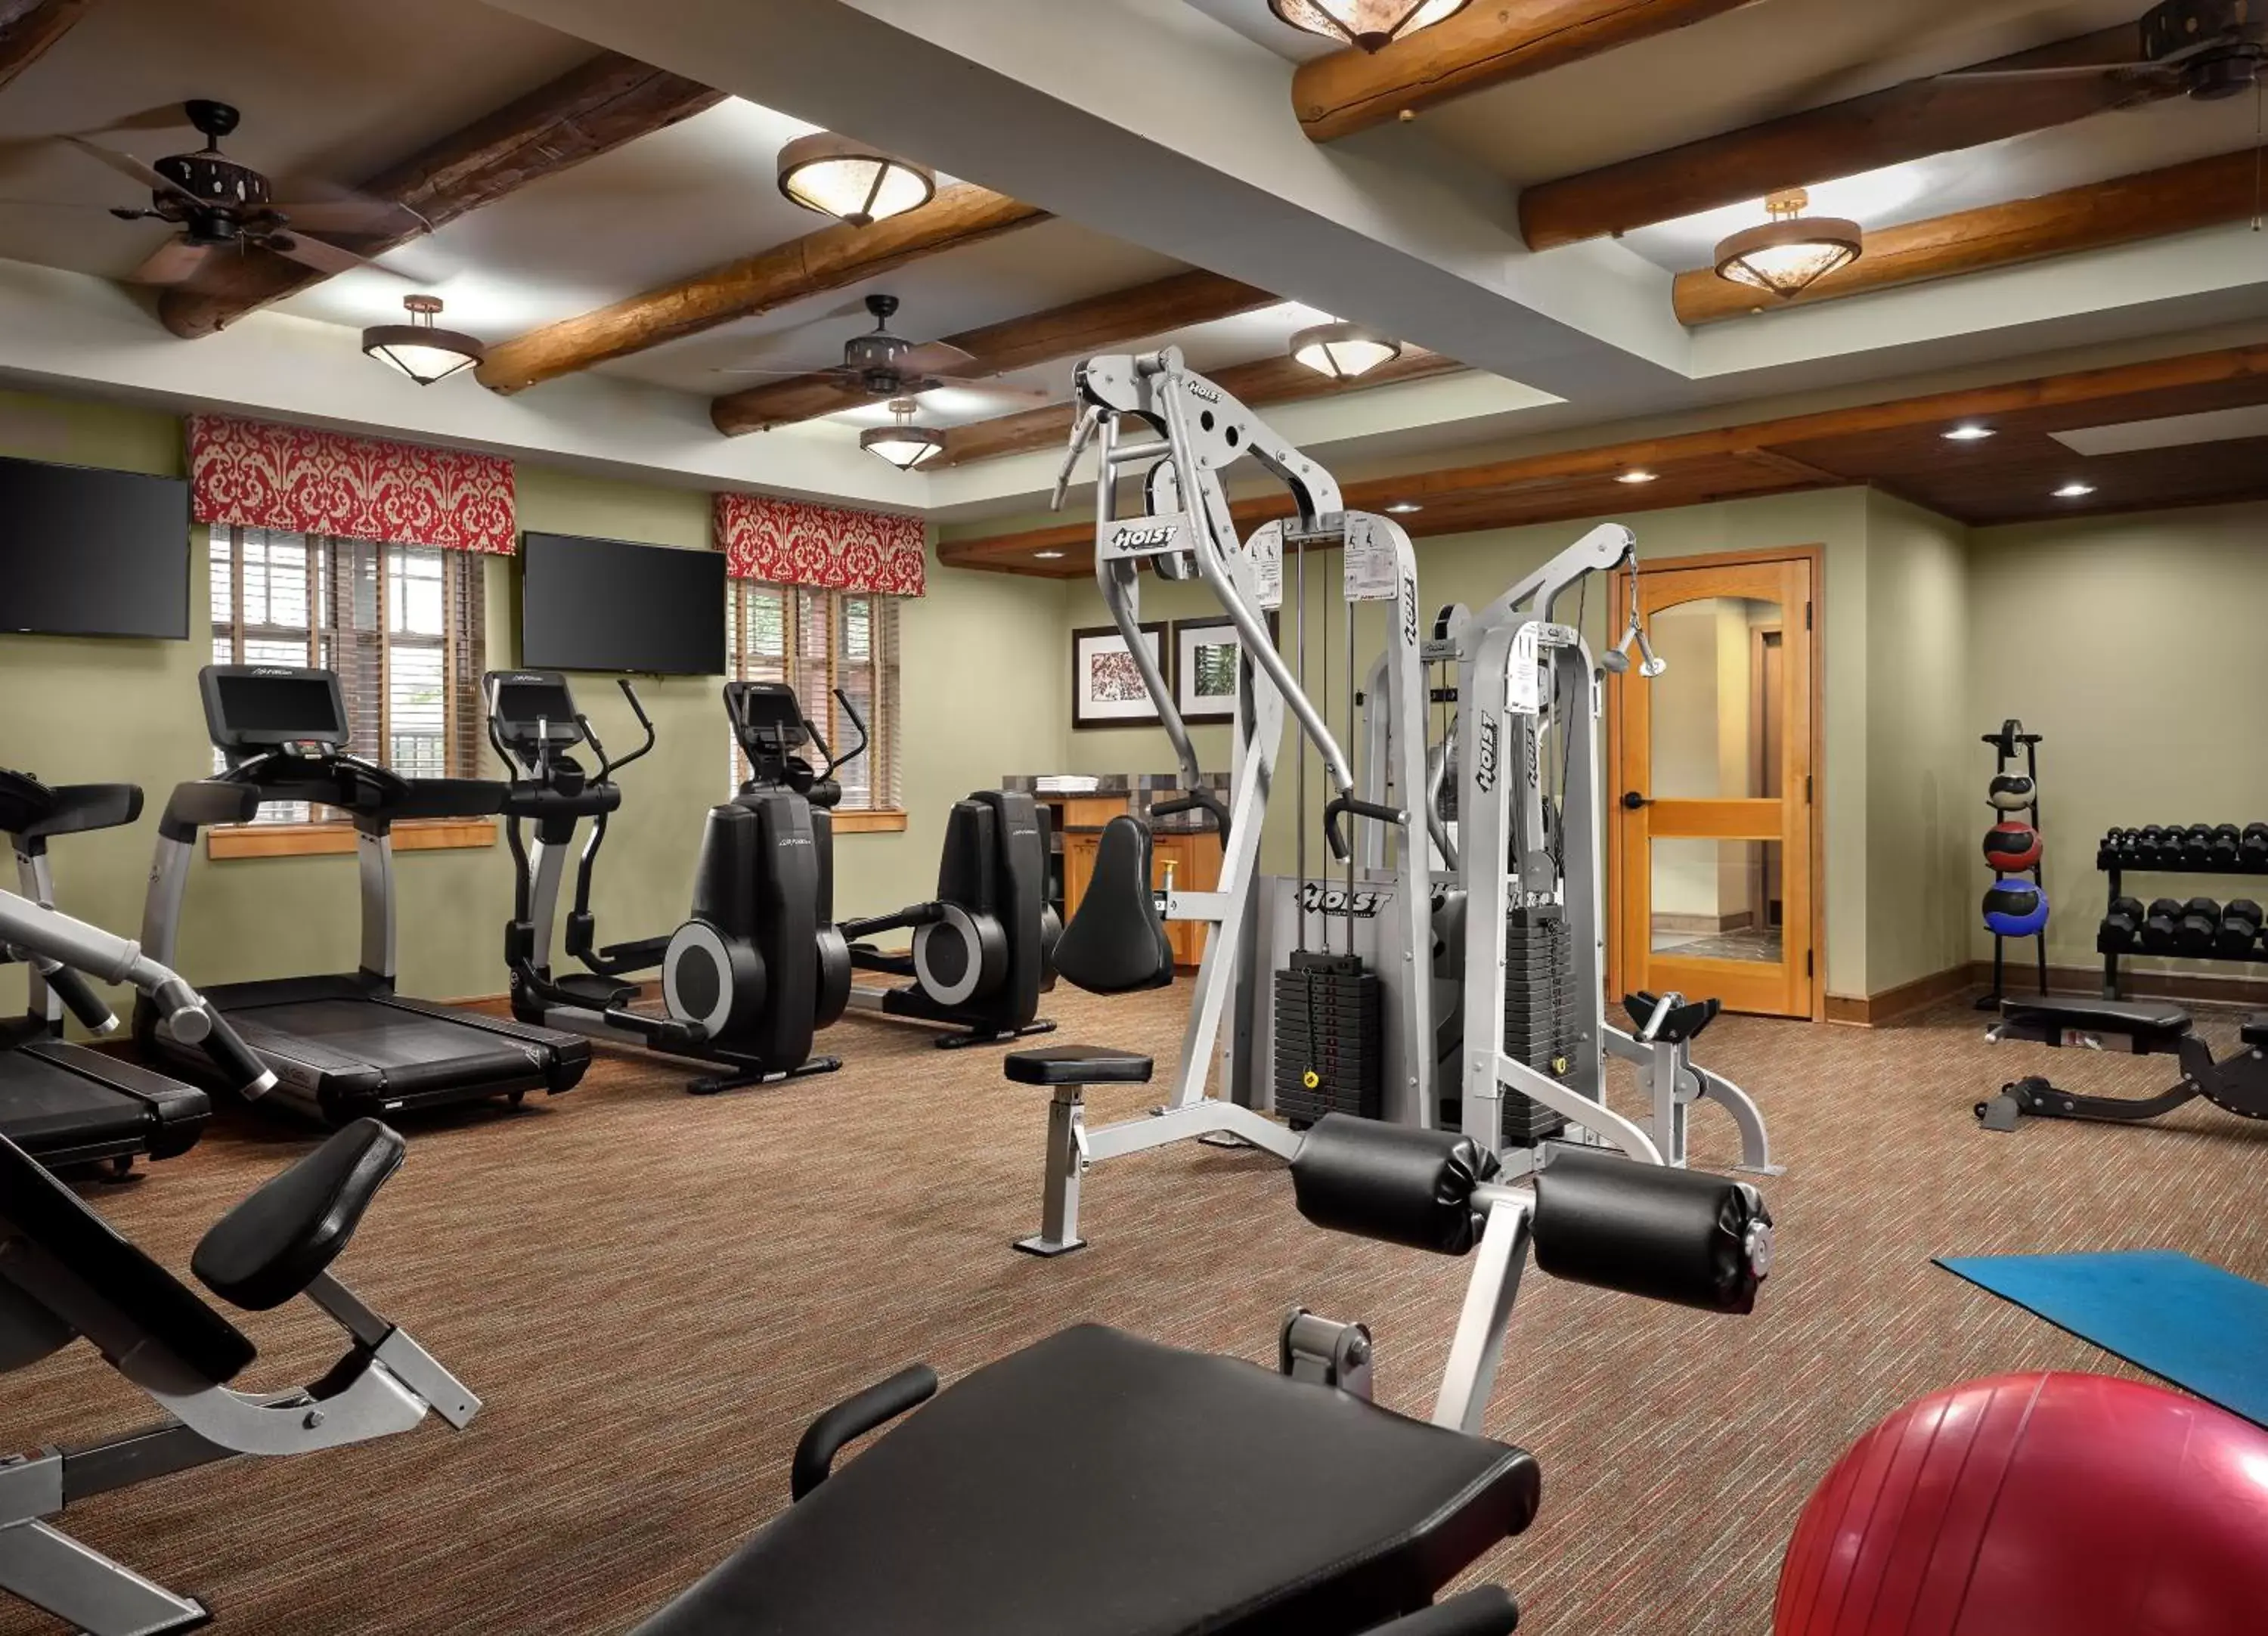 Fitness centre/facilities, Fitness Center/Facilities in Hyatt Vacation Club at The Lodges at Timber Ridge